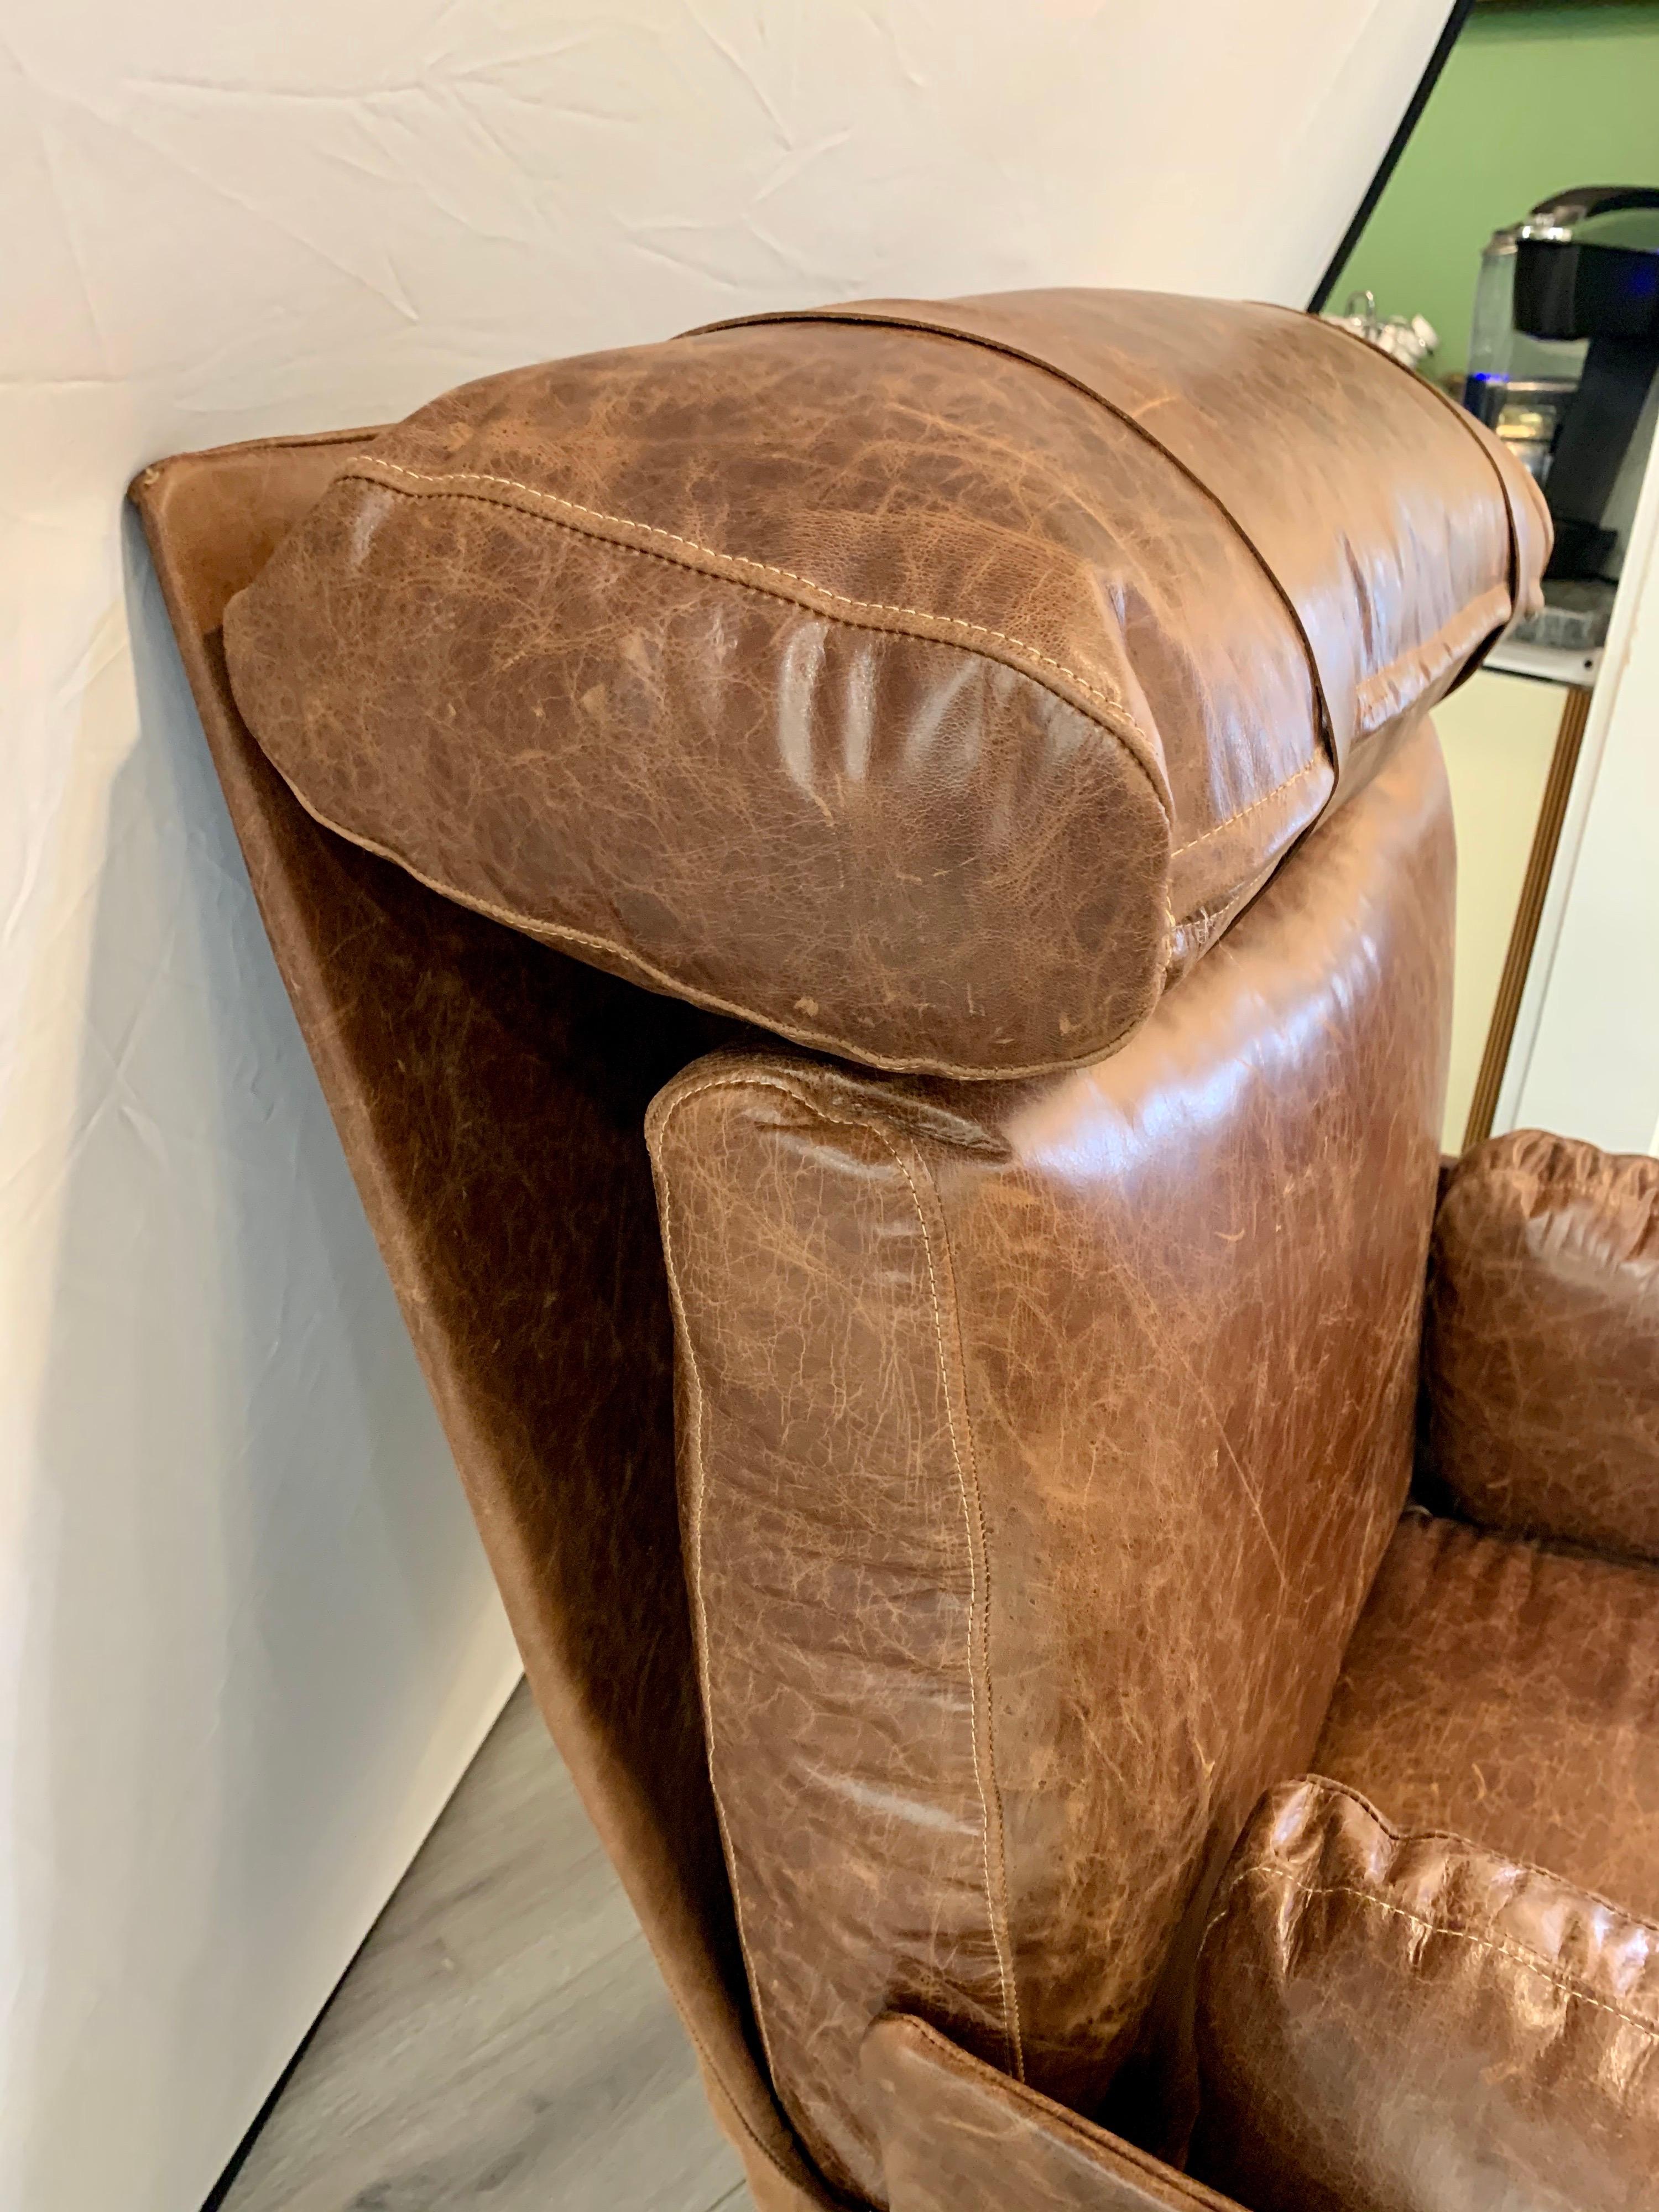 starbucks leather chairs for sale